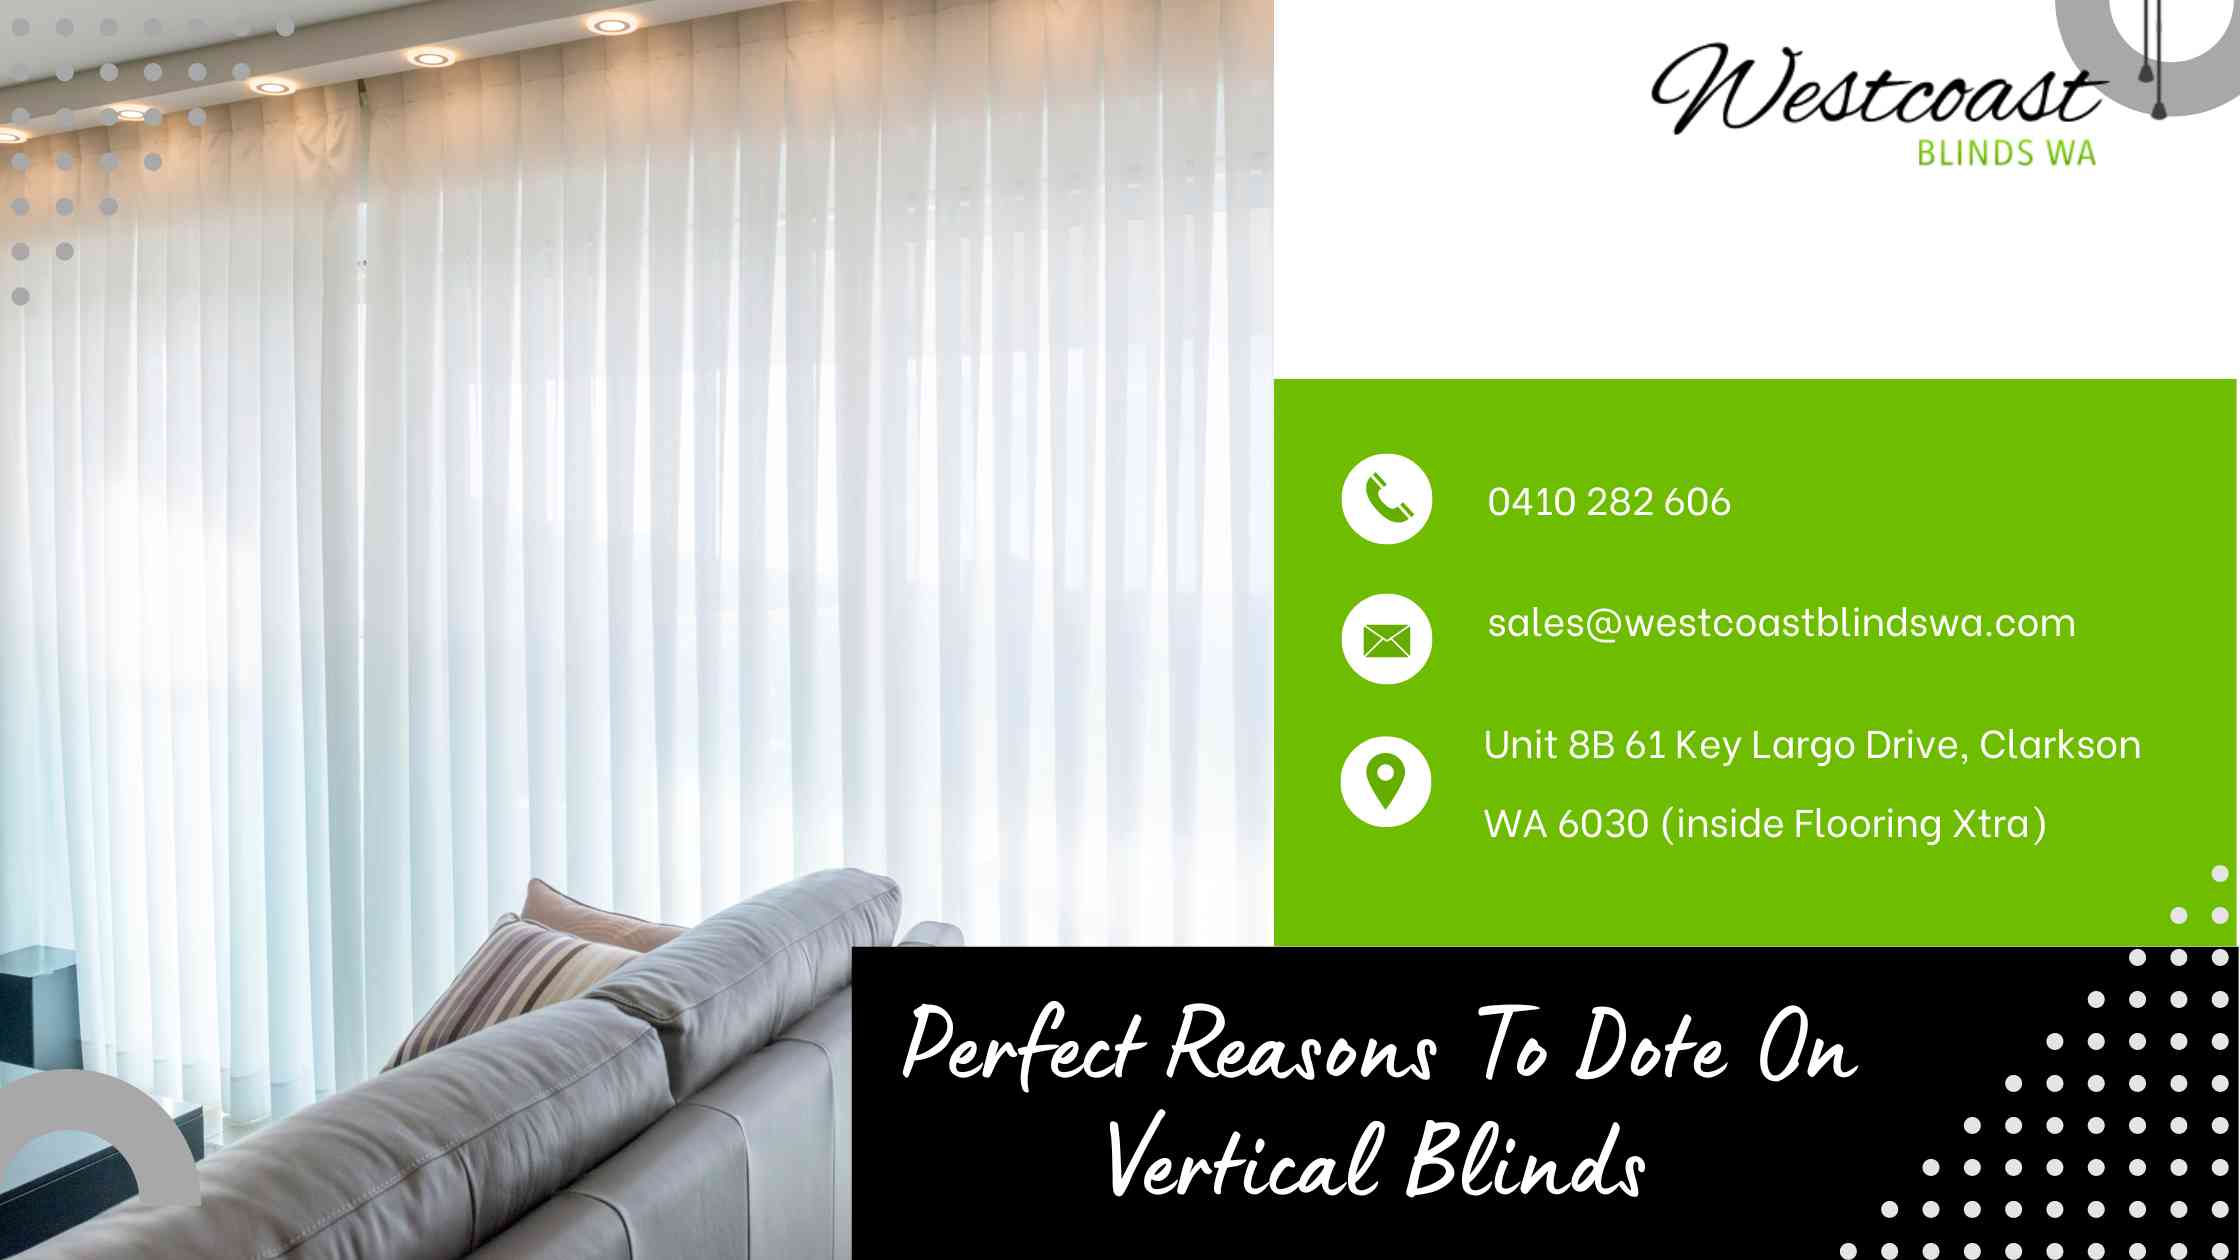 Why Are The Vertical Blinds So Much Preferable?